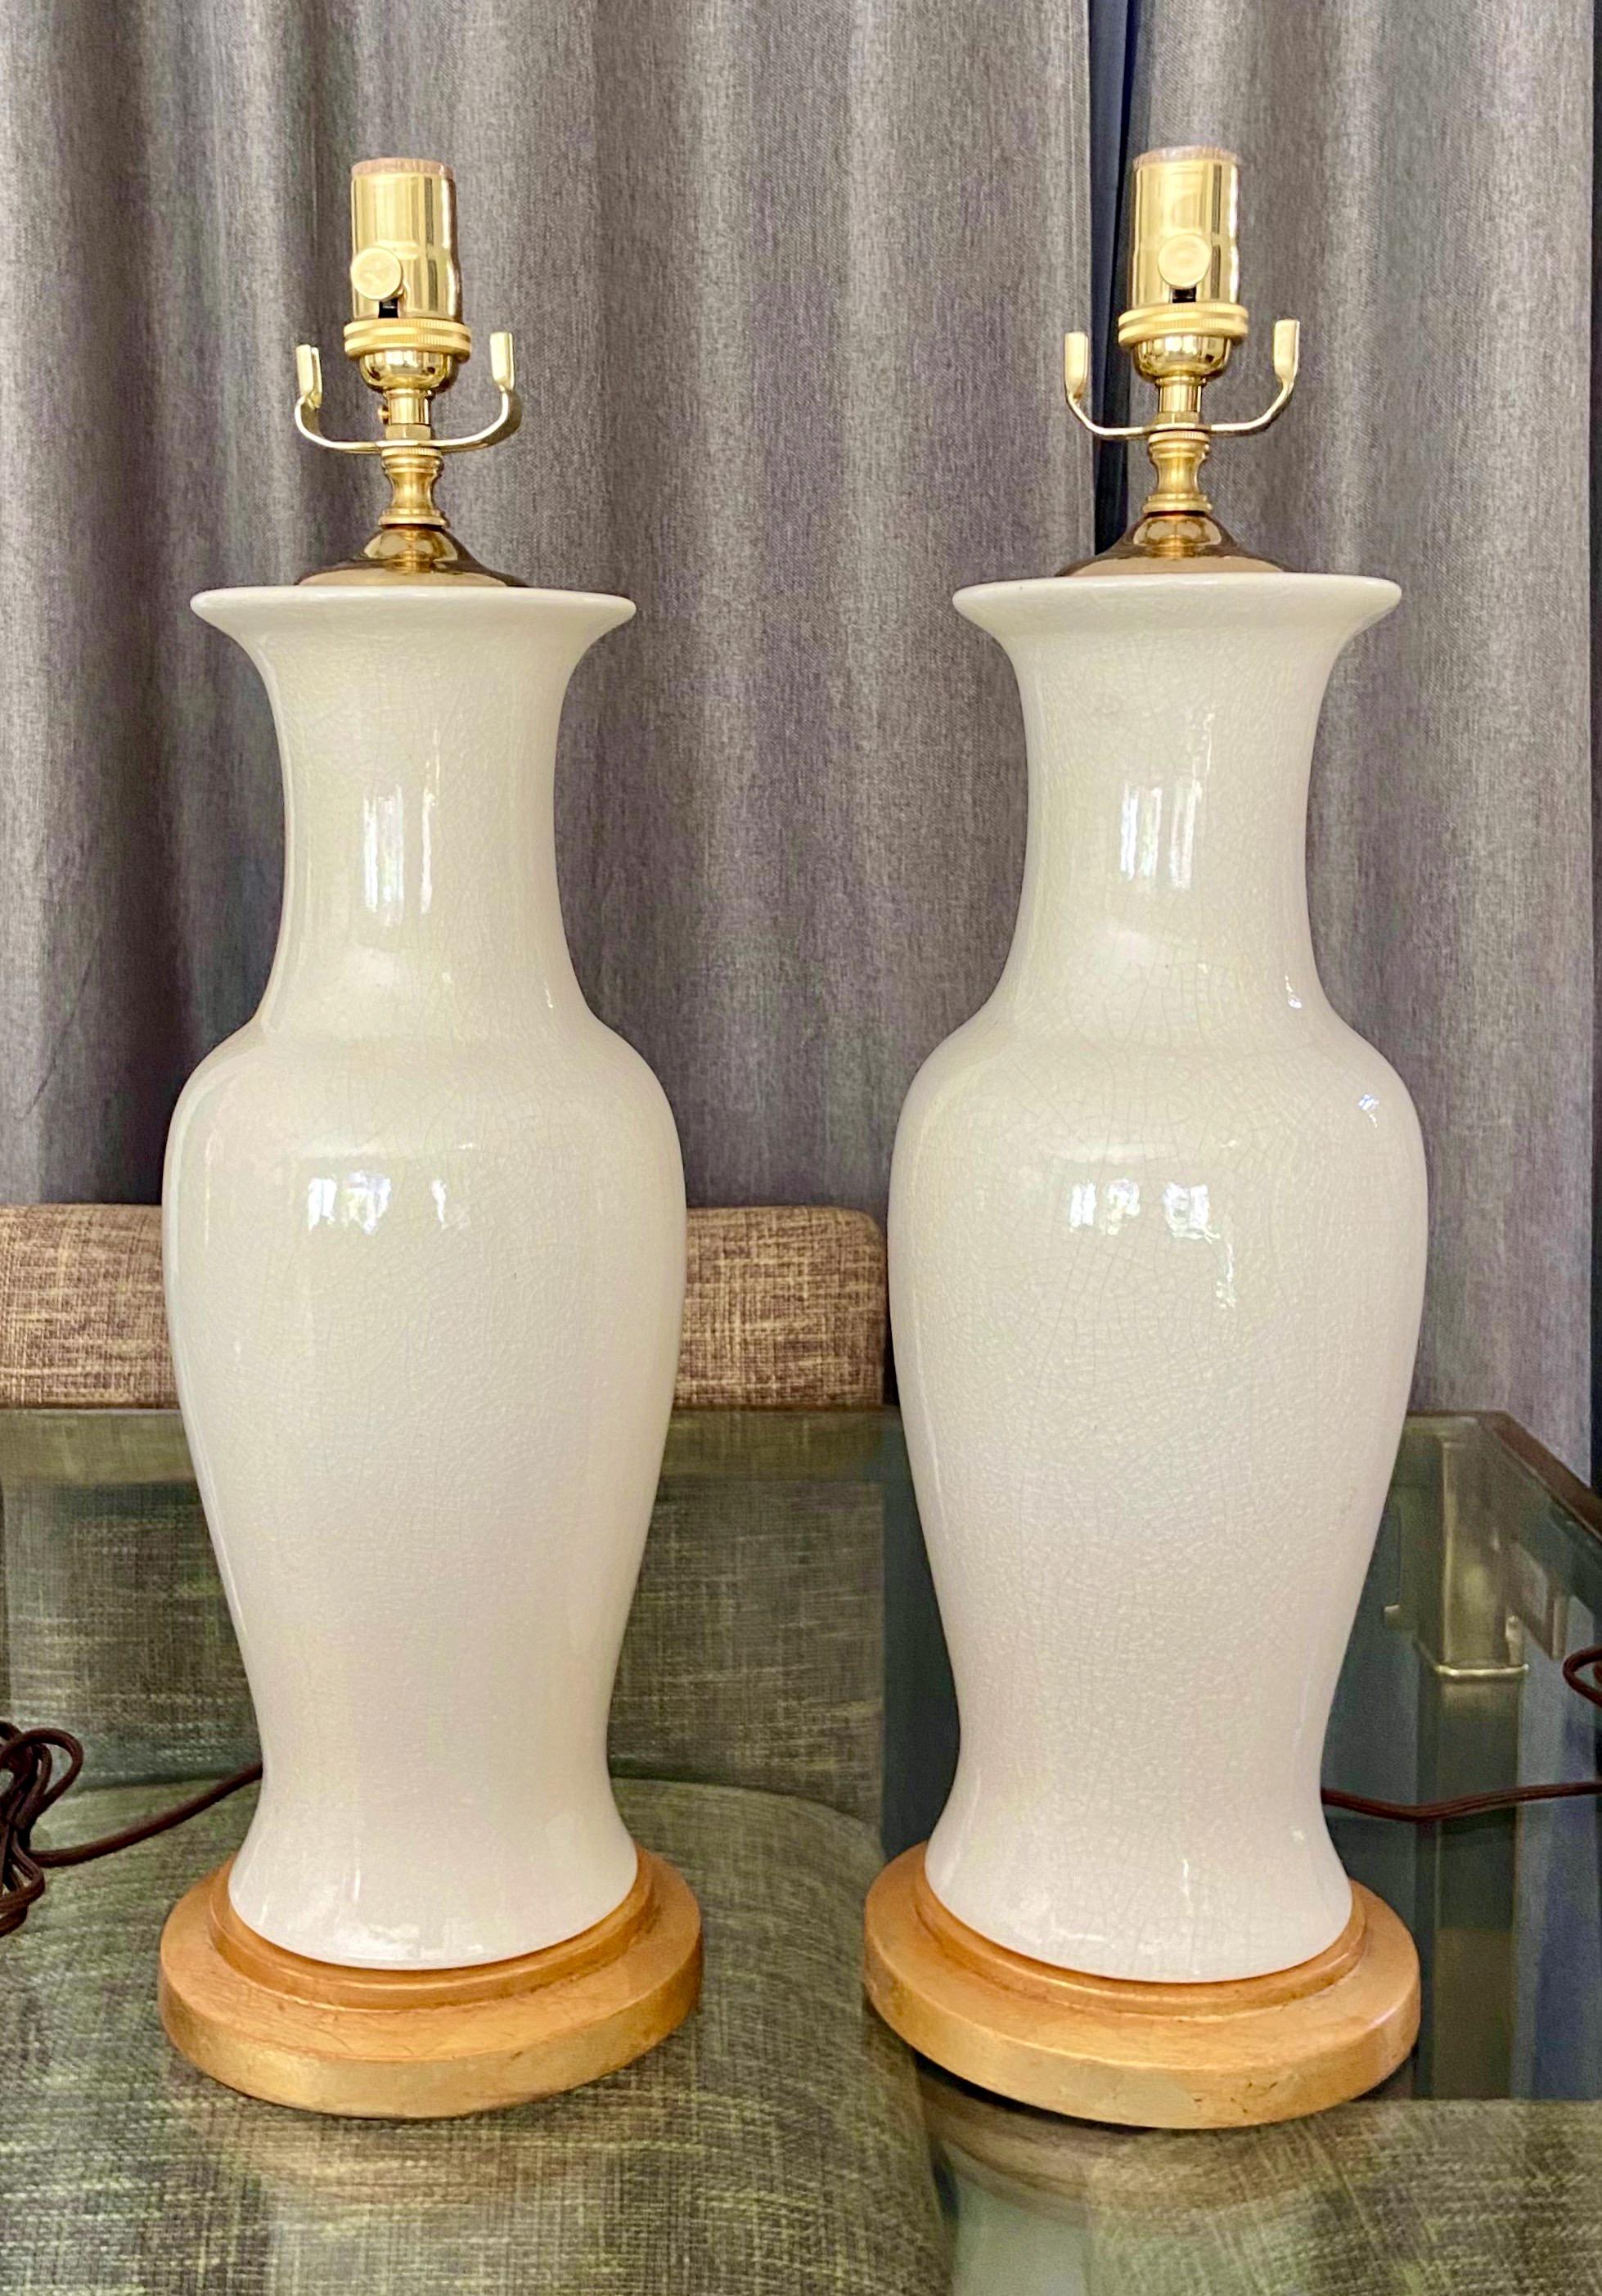 Pair of Asian white blanc de shine monochrome baluster shaped porcelain table lamps. The glazed white surface has fine crackling (craquelure) throughout. Mounted on turned giltwood bases. Newly wired with new brass 3 way sockets and cords. Overall